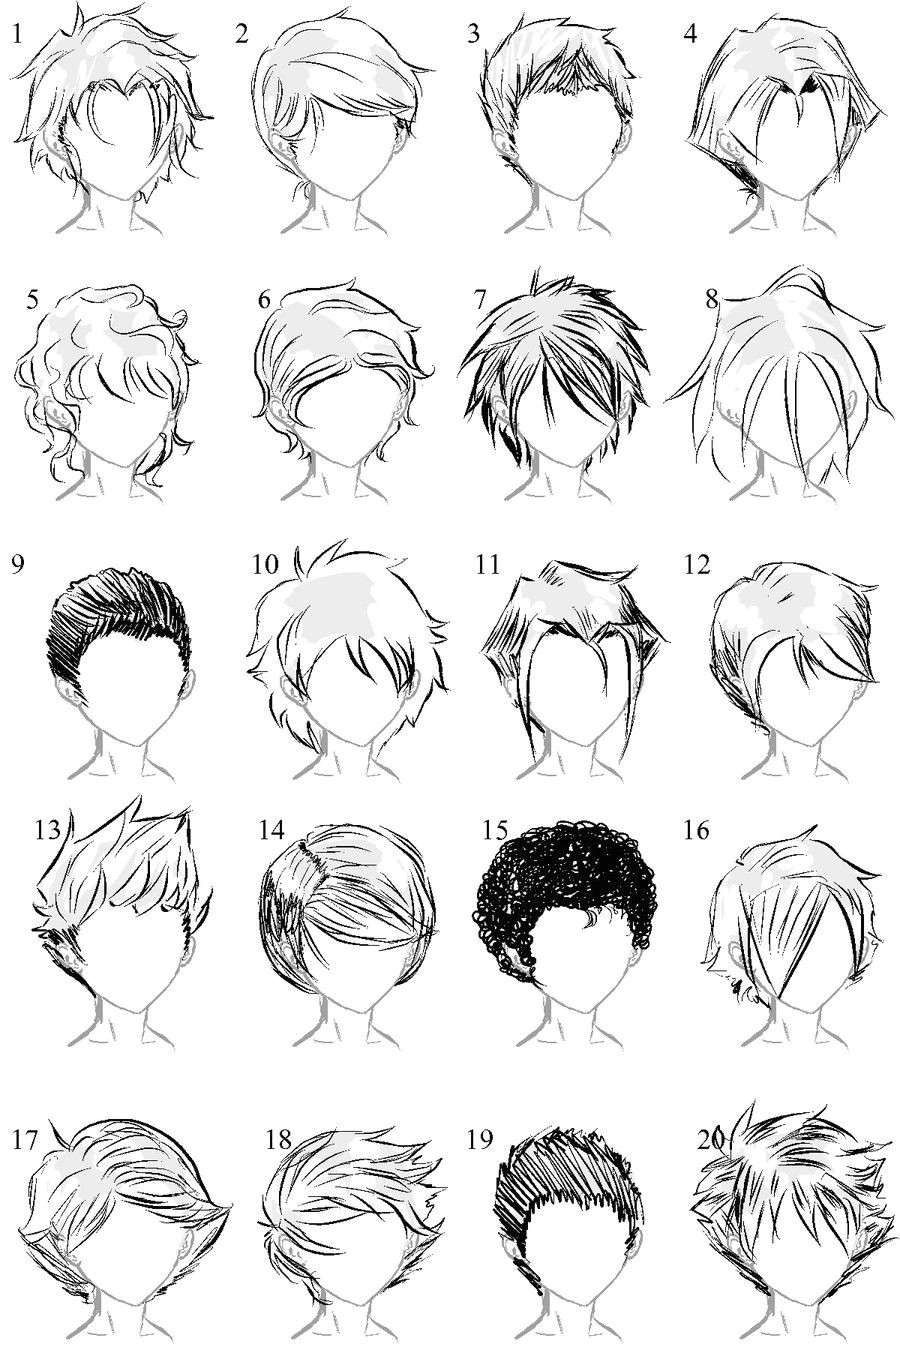 Drawing Boy Eyes Pin by Blondepanda On Hair Refs Draw Art Drawings How to Draw Hair